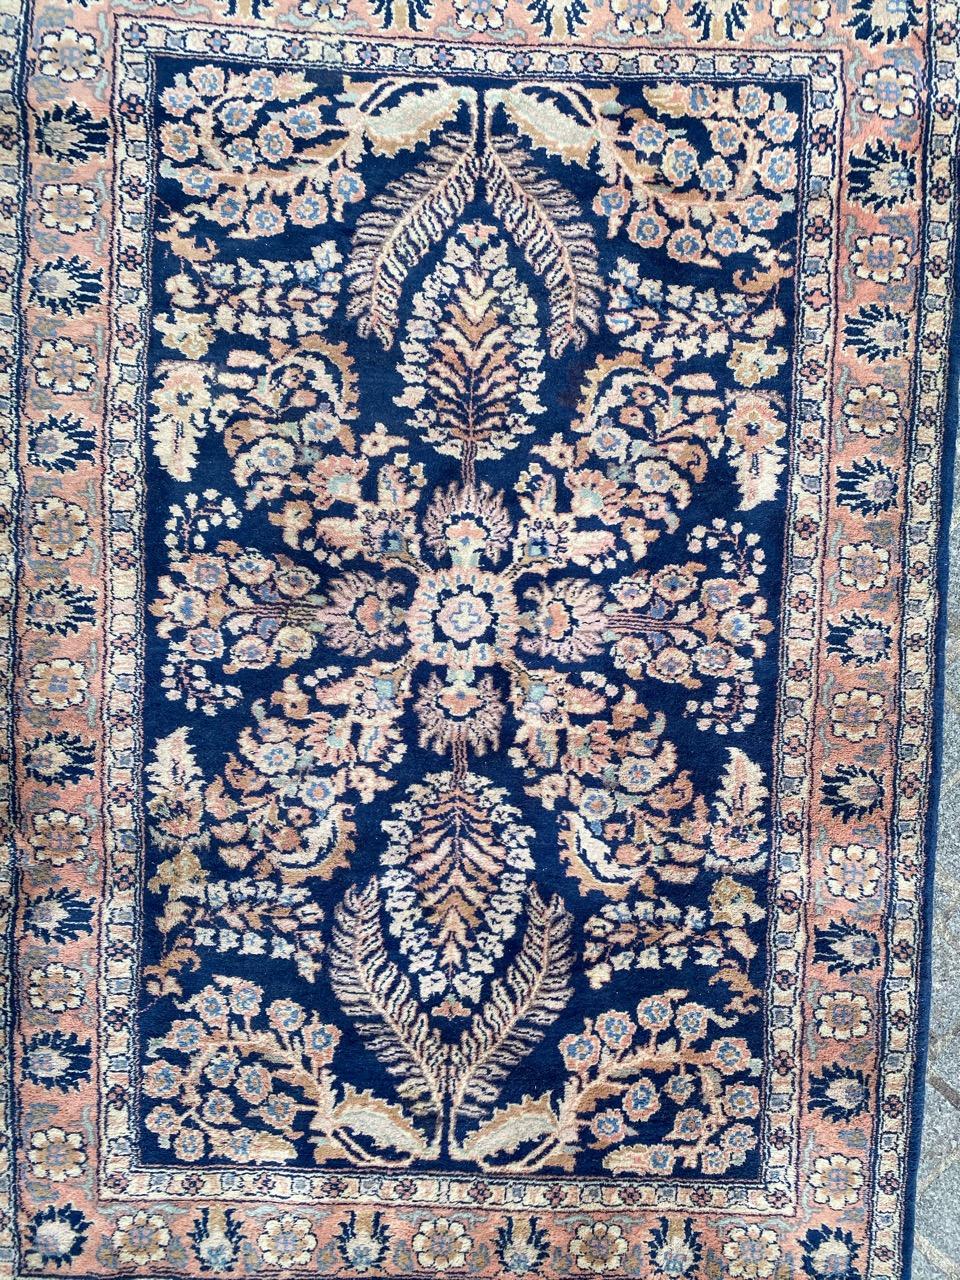 Beautiful mid century rug with a floral Kirman design and beautiful colors with blue field, entirely hand knotted with wool velvet on cotton foundation.